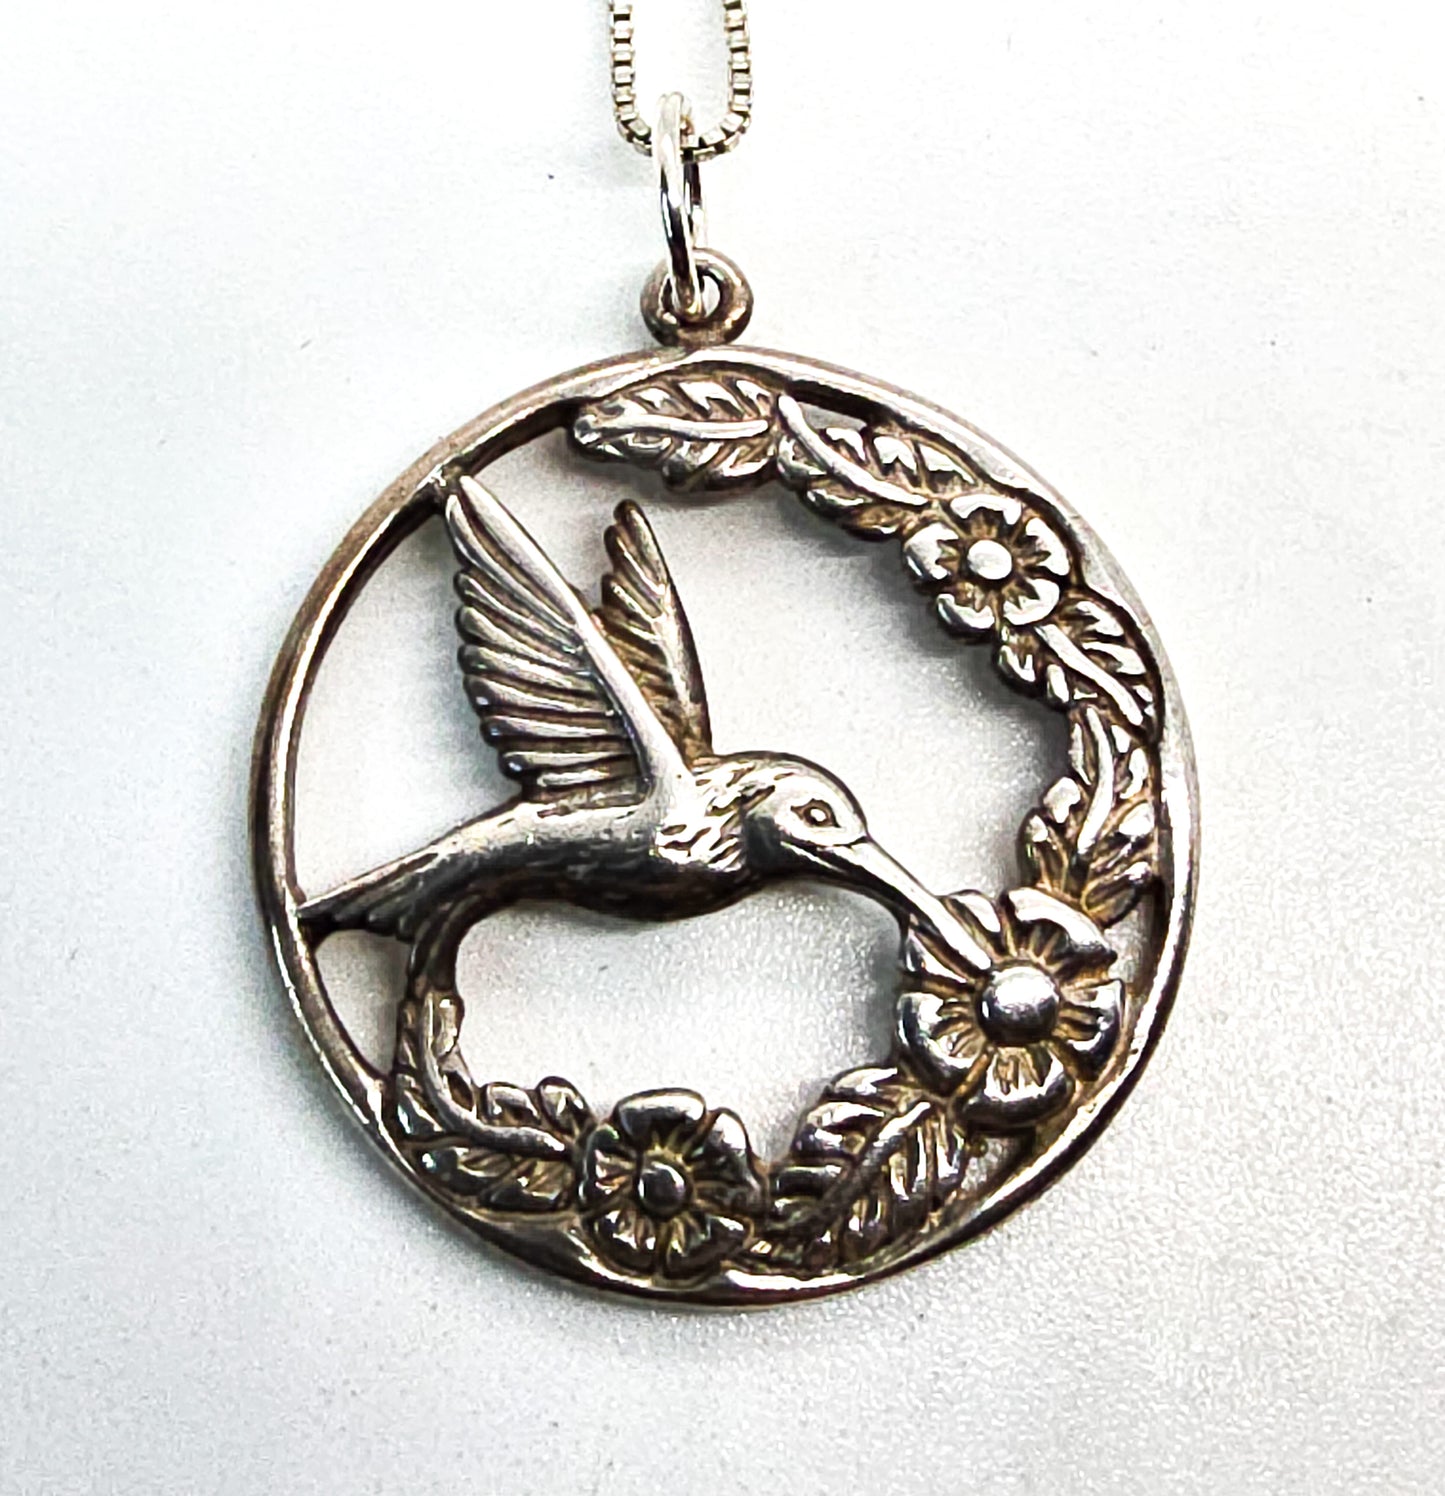 Shube hummingbird with flowers vintage signed sterling silver pendant necklace